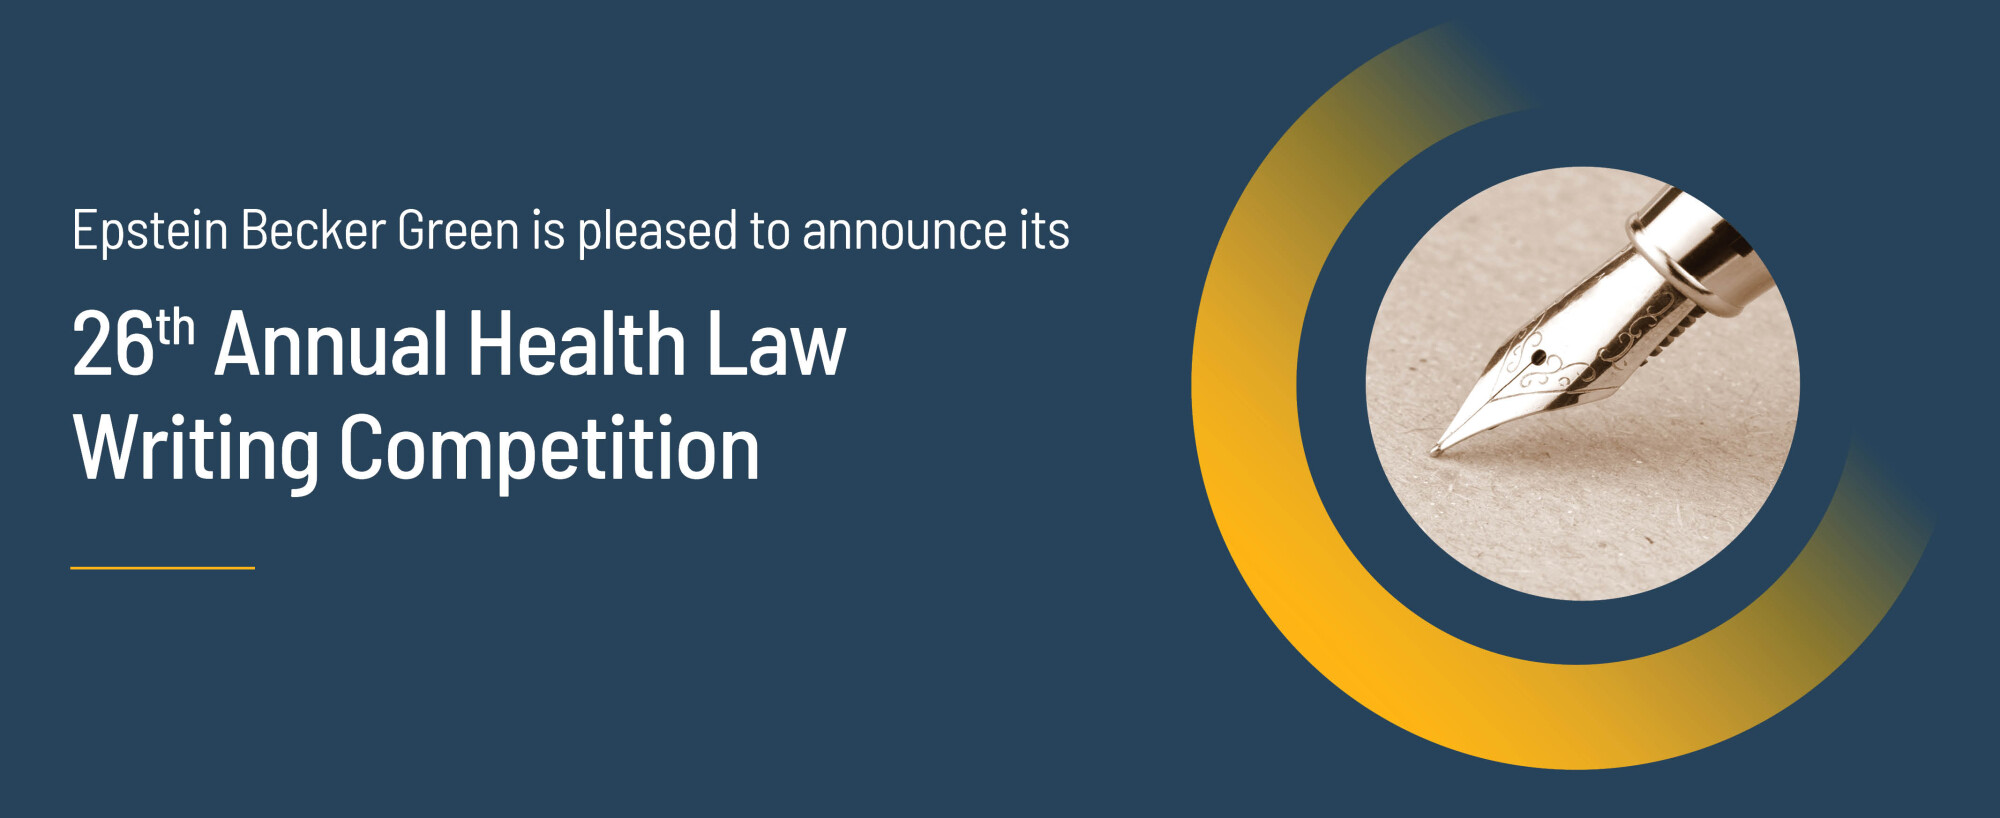 Epstein Becker Green is pleased to announce its 26th Annual Health Law Writing Competition